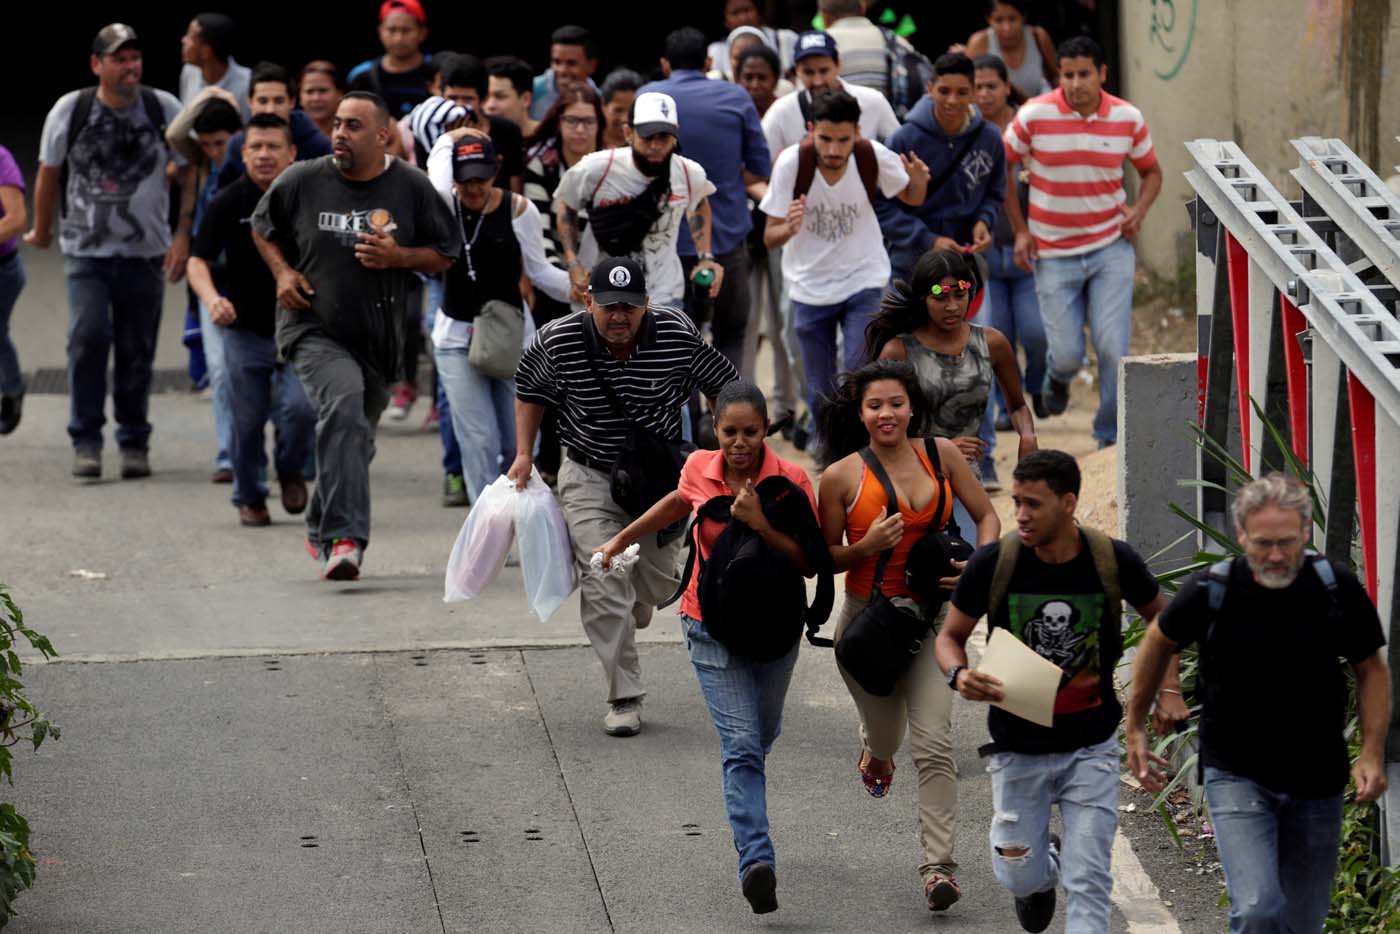 People run during during clashes with security forces at a rally against Venezuelan President Nicolas Maduro's government in Caracas, Venezuela, July 6, 2017. REUTERS/Marco Bello